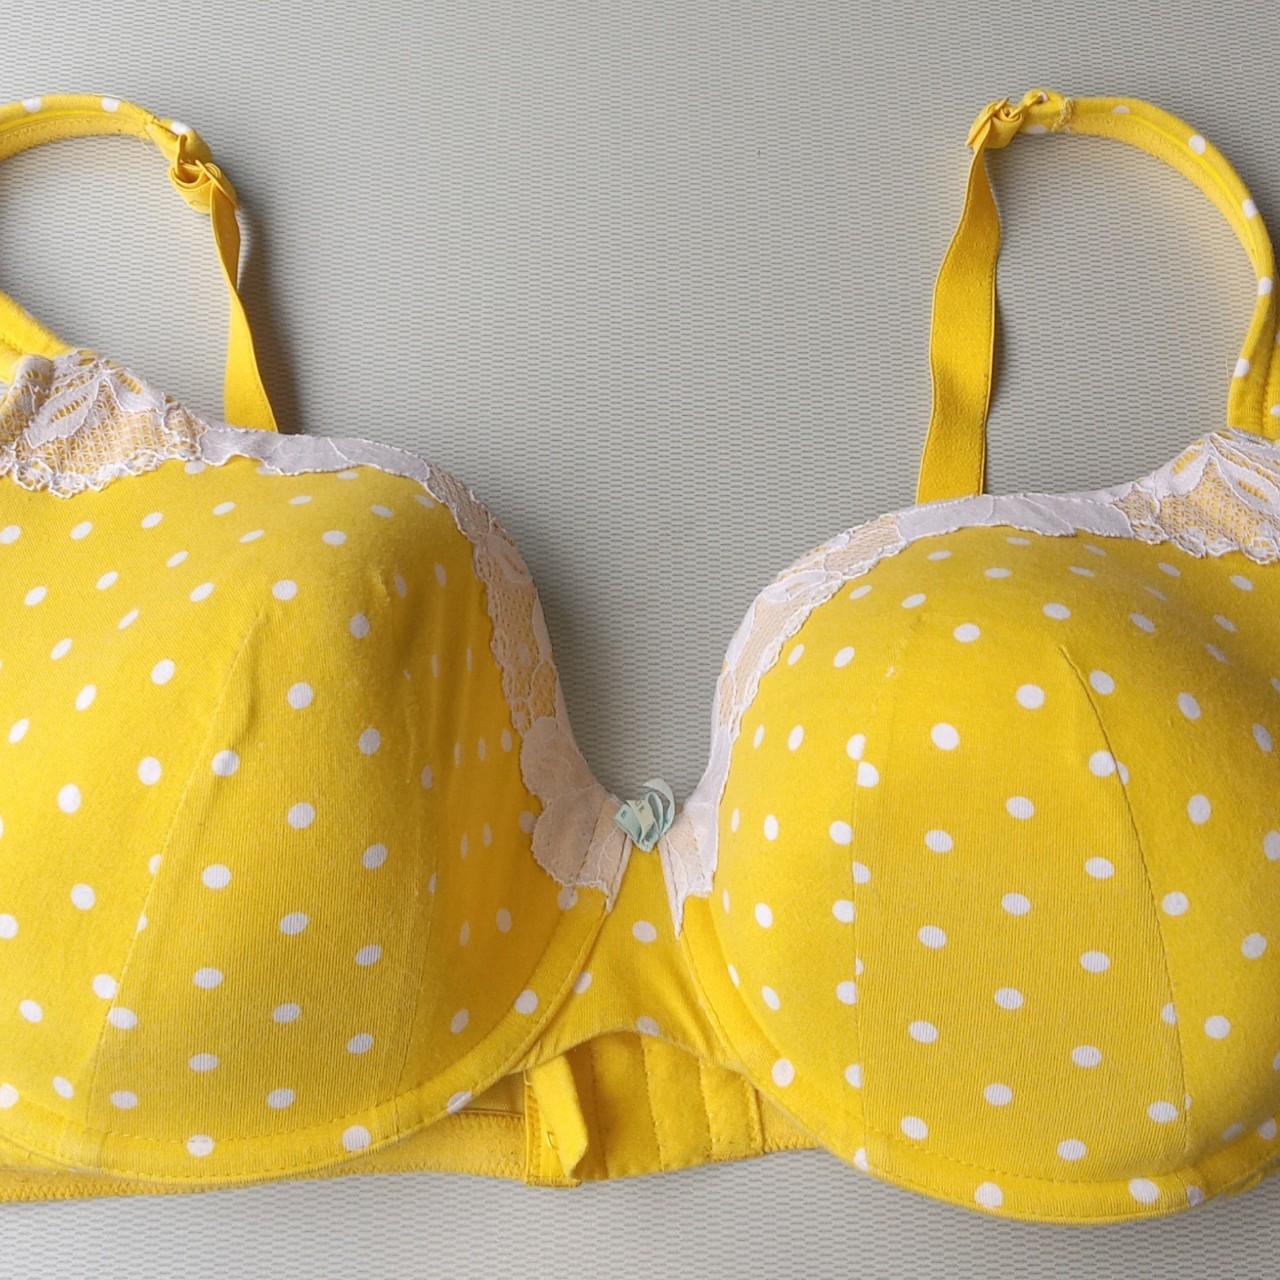 Cacique wire bra 44DD with white Polka dots in vary - Depop